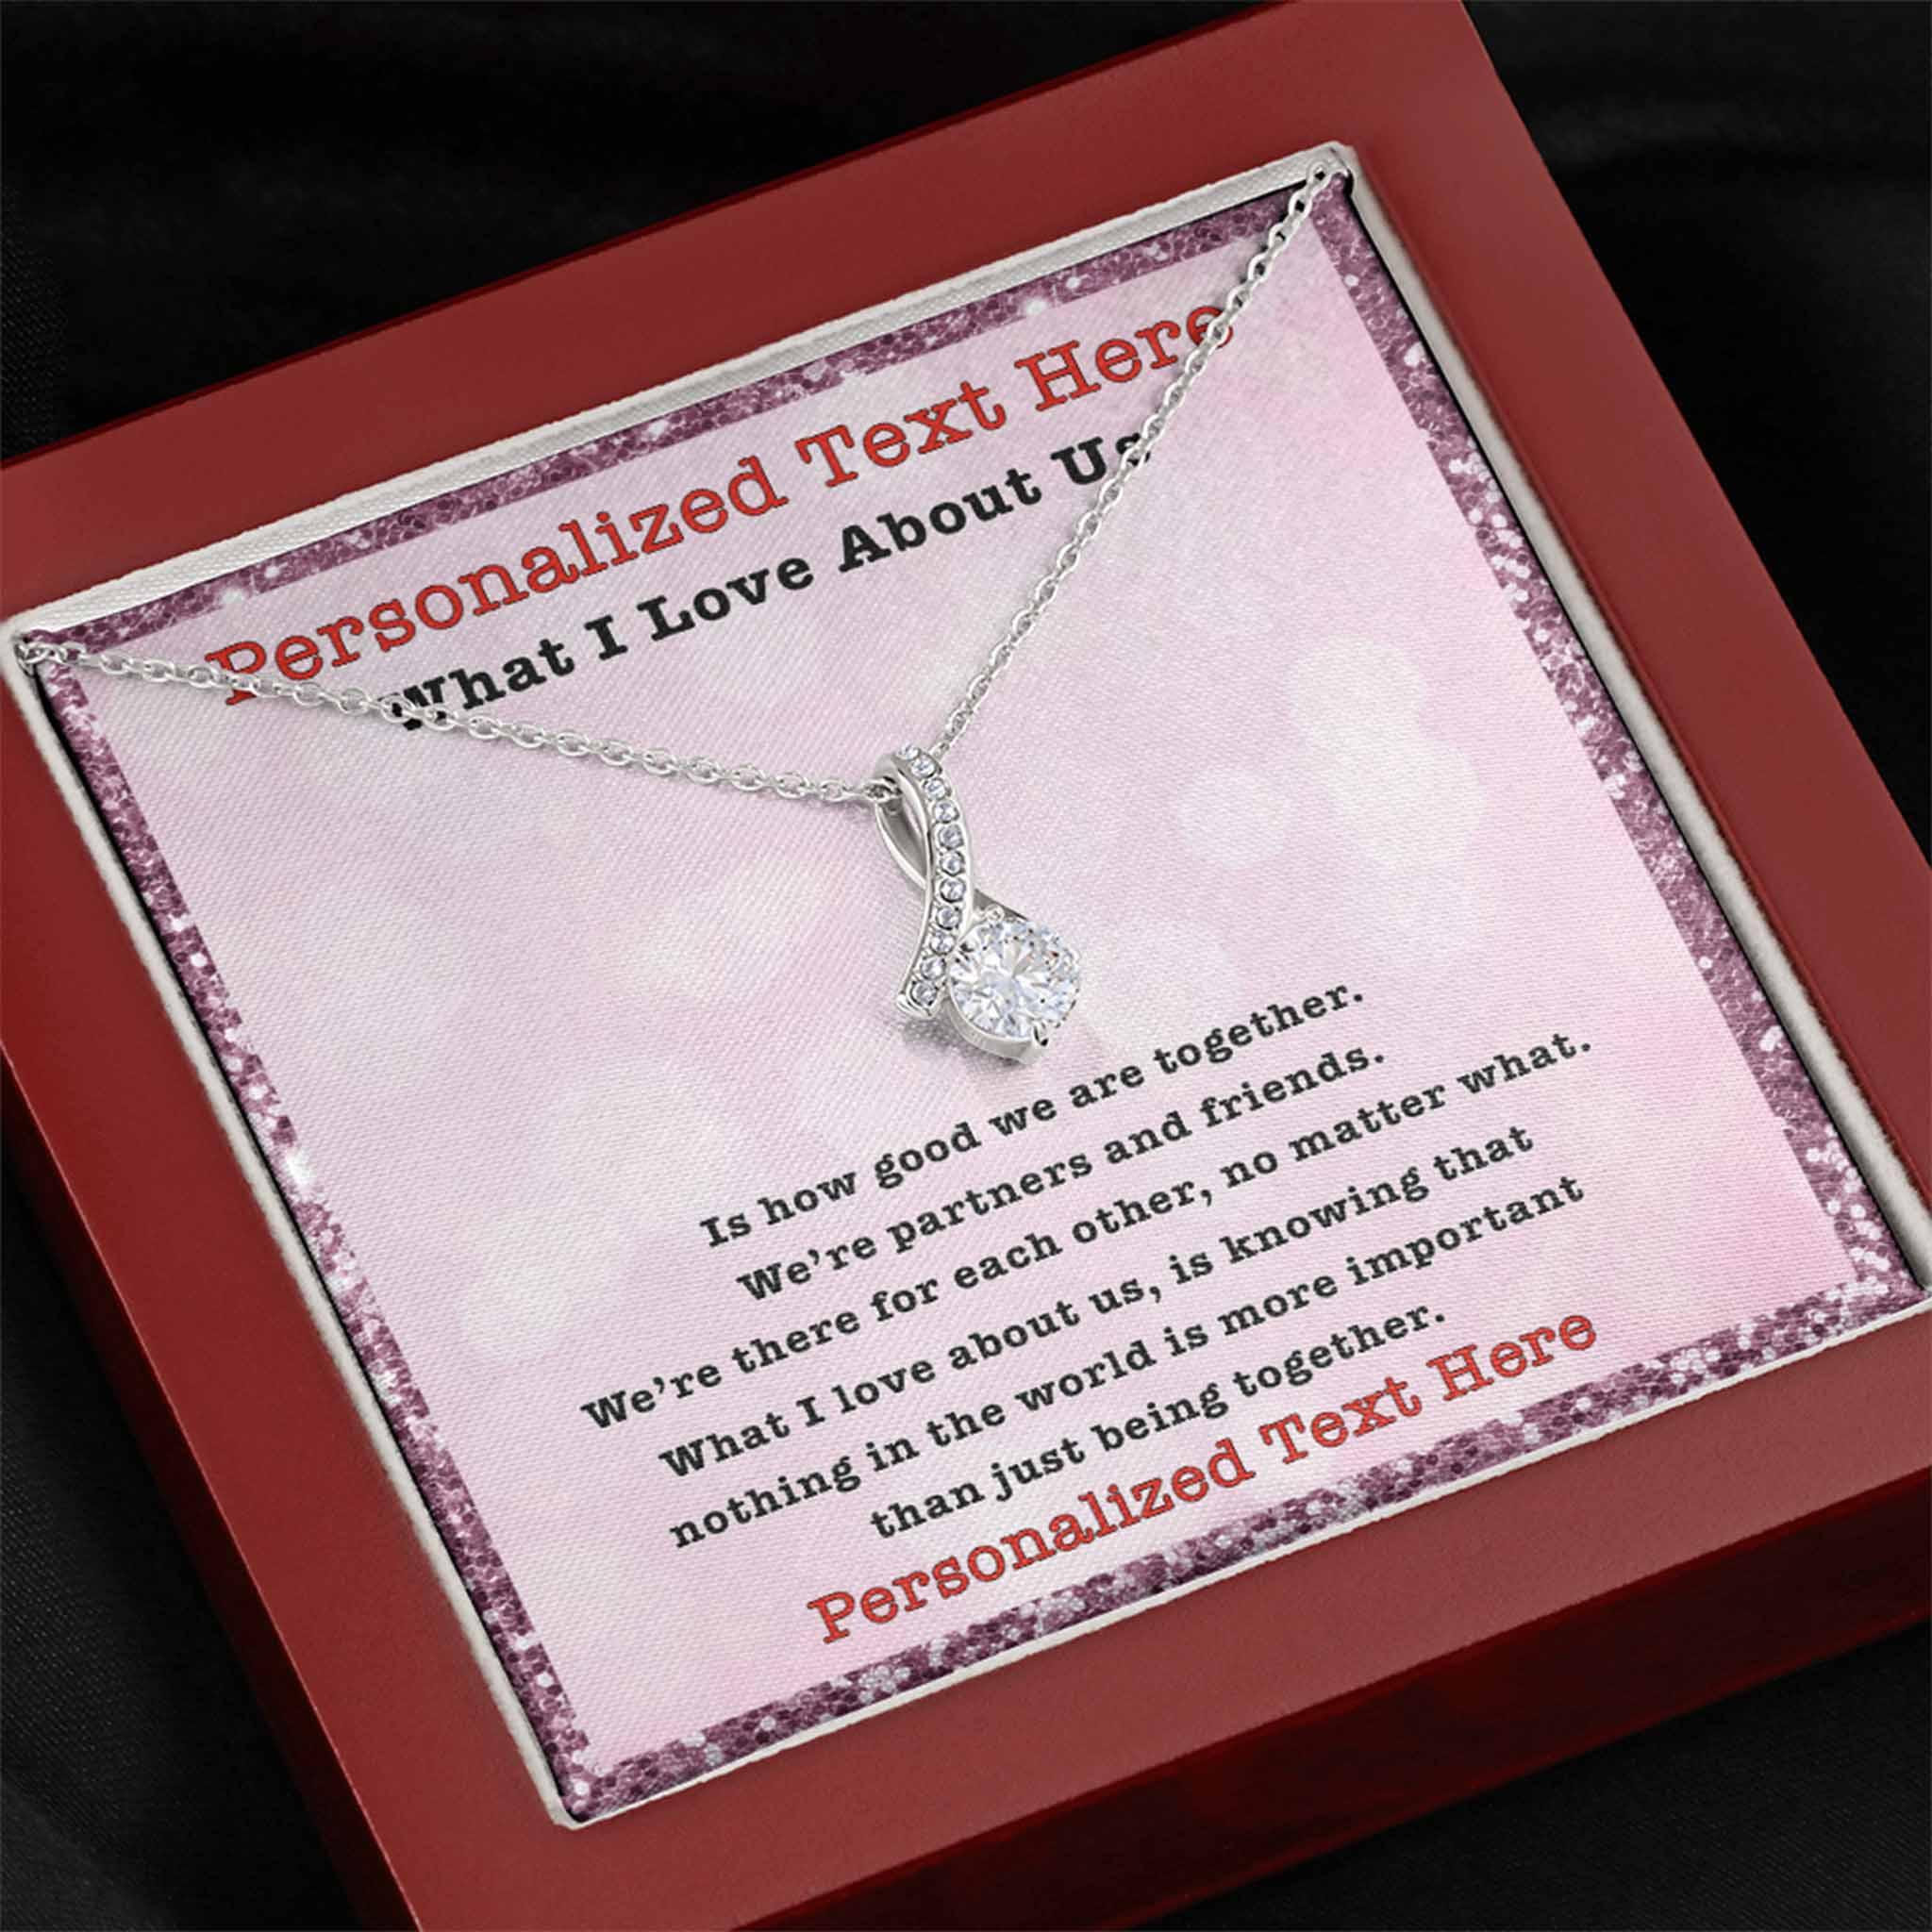 Alluring Beauty Necklace What I Love About Us Personalized Insert CardCustomly Gifts